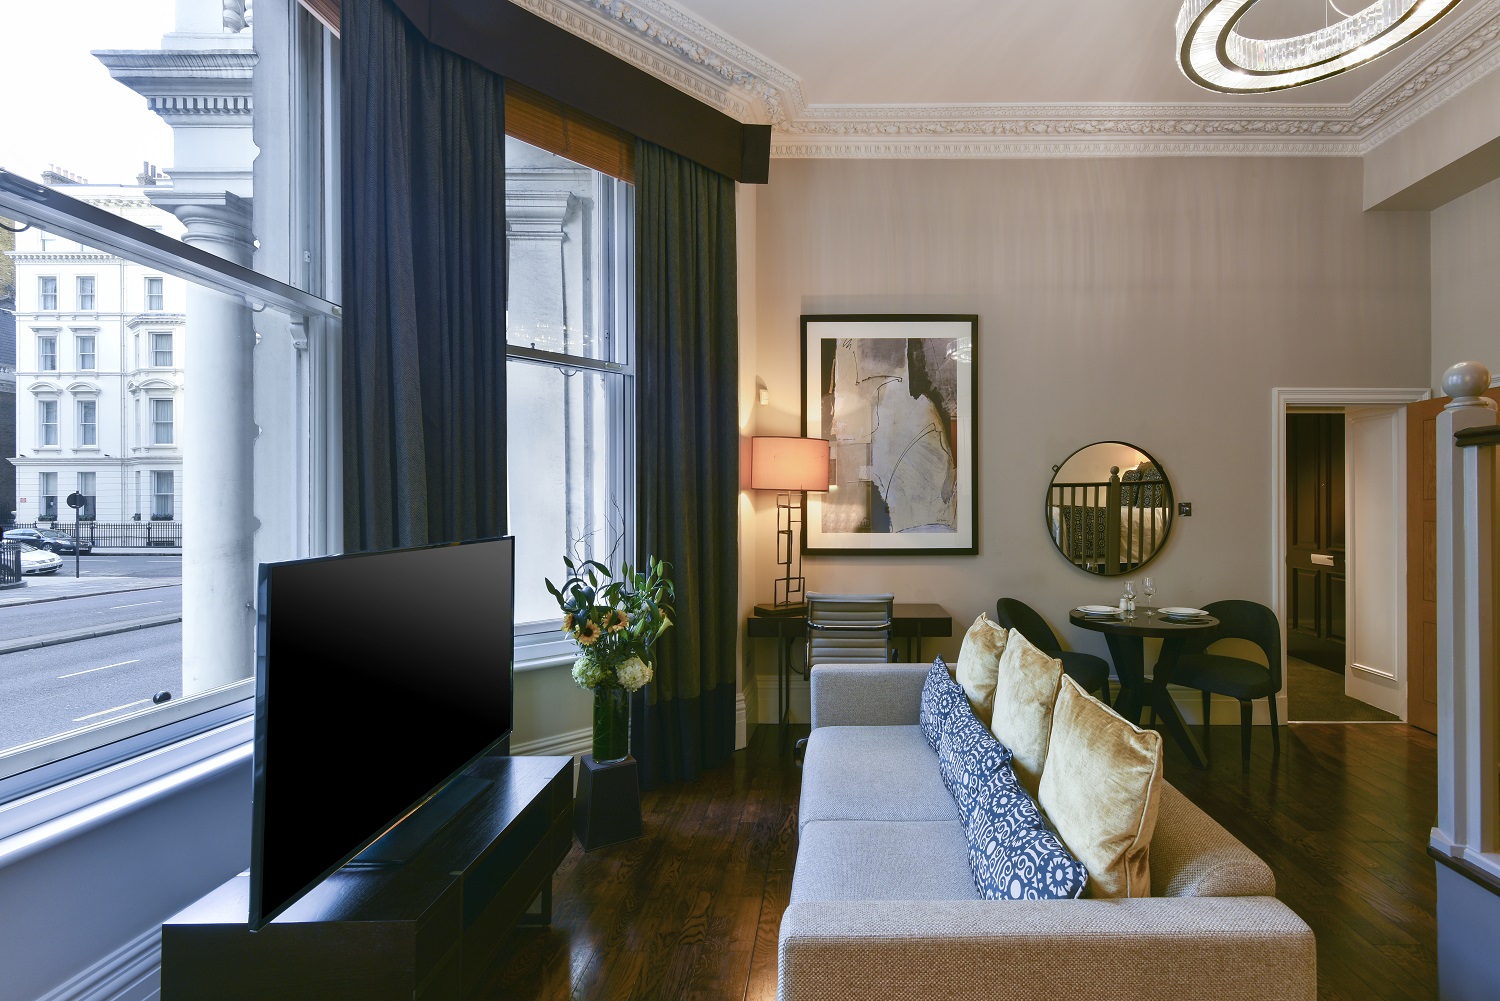 Living area of Studio Deluxe Serviced Apartments in Kensington, London